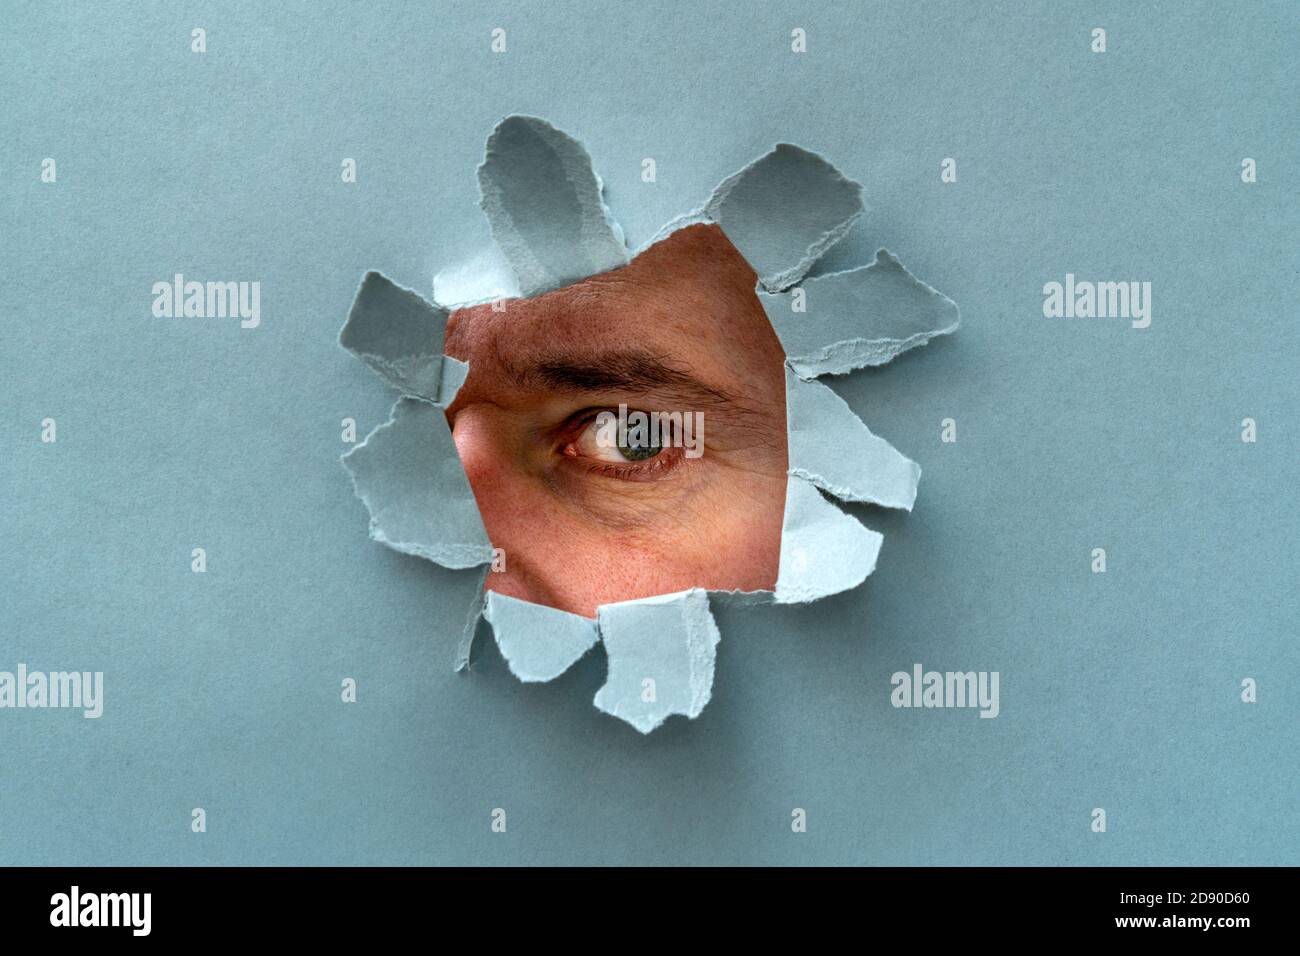 The human eye is watching us through a hole in a grey paper Stock Photo